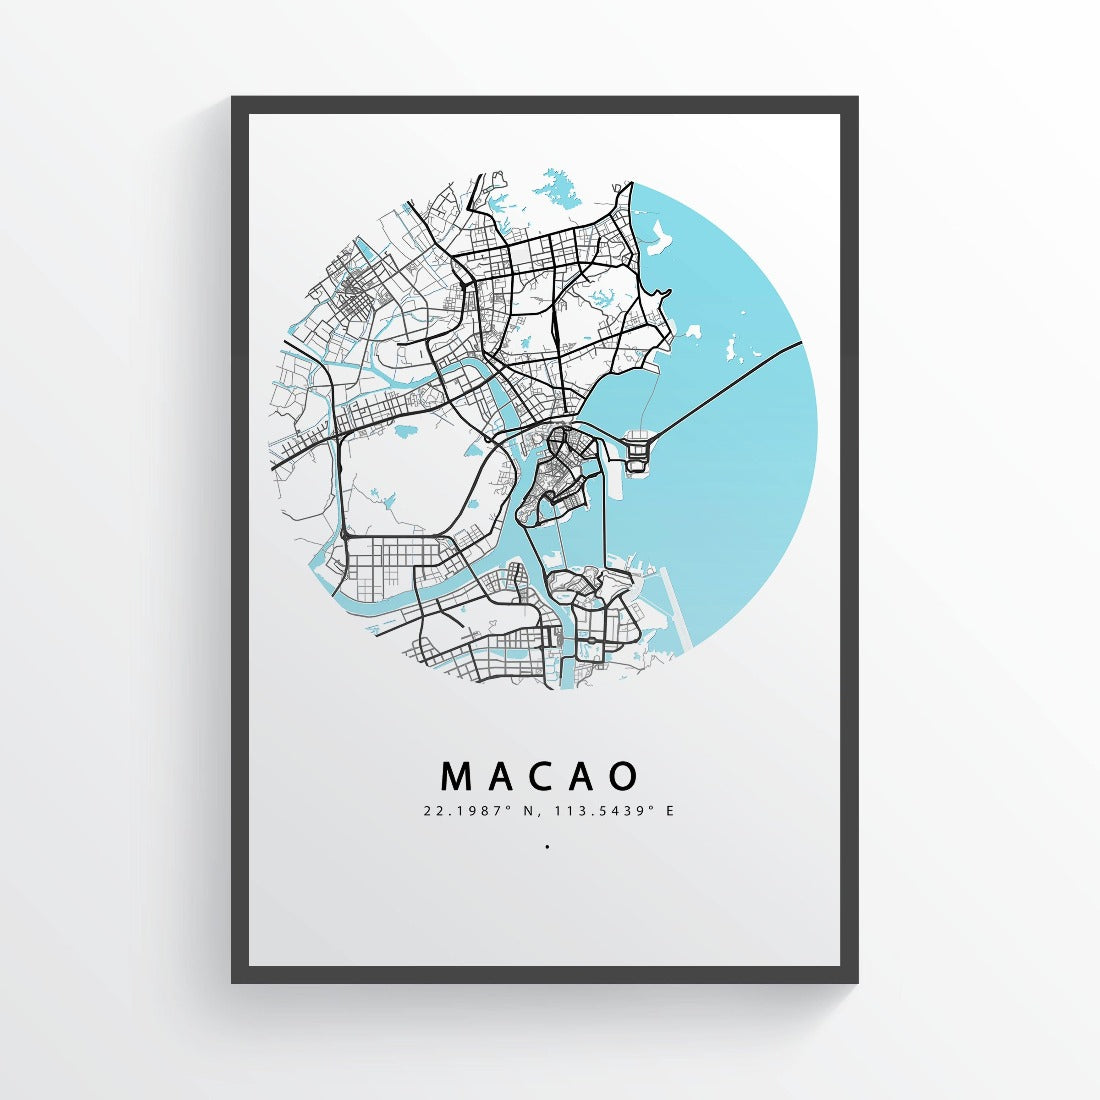 This Macao City Street Map Print is the perfect way to add some geographic flair to your decor. This colorful map print is perfect for anyone who loves to travel or dreams of exploring new places. The map print is also a great gift for friends or family who are moving to a new city or planning a trip. No matter where you hang it, this map print is sure to add some wanderlust to your life.